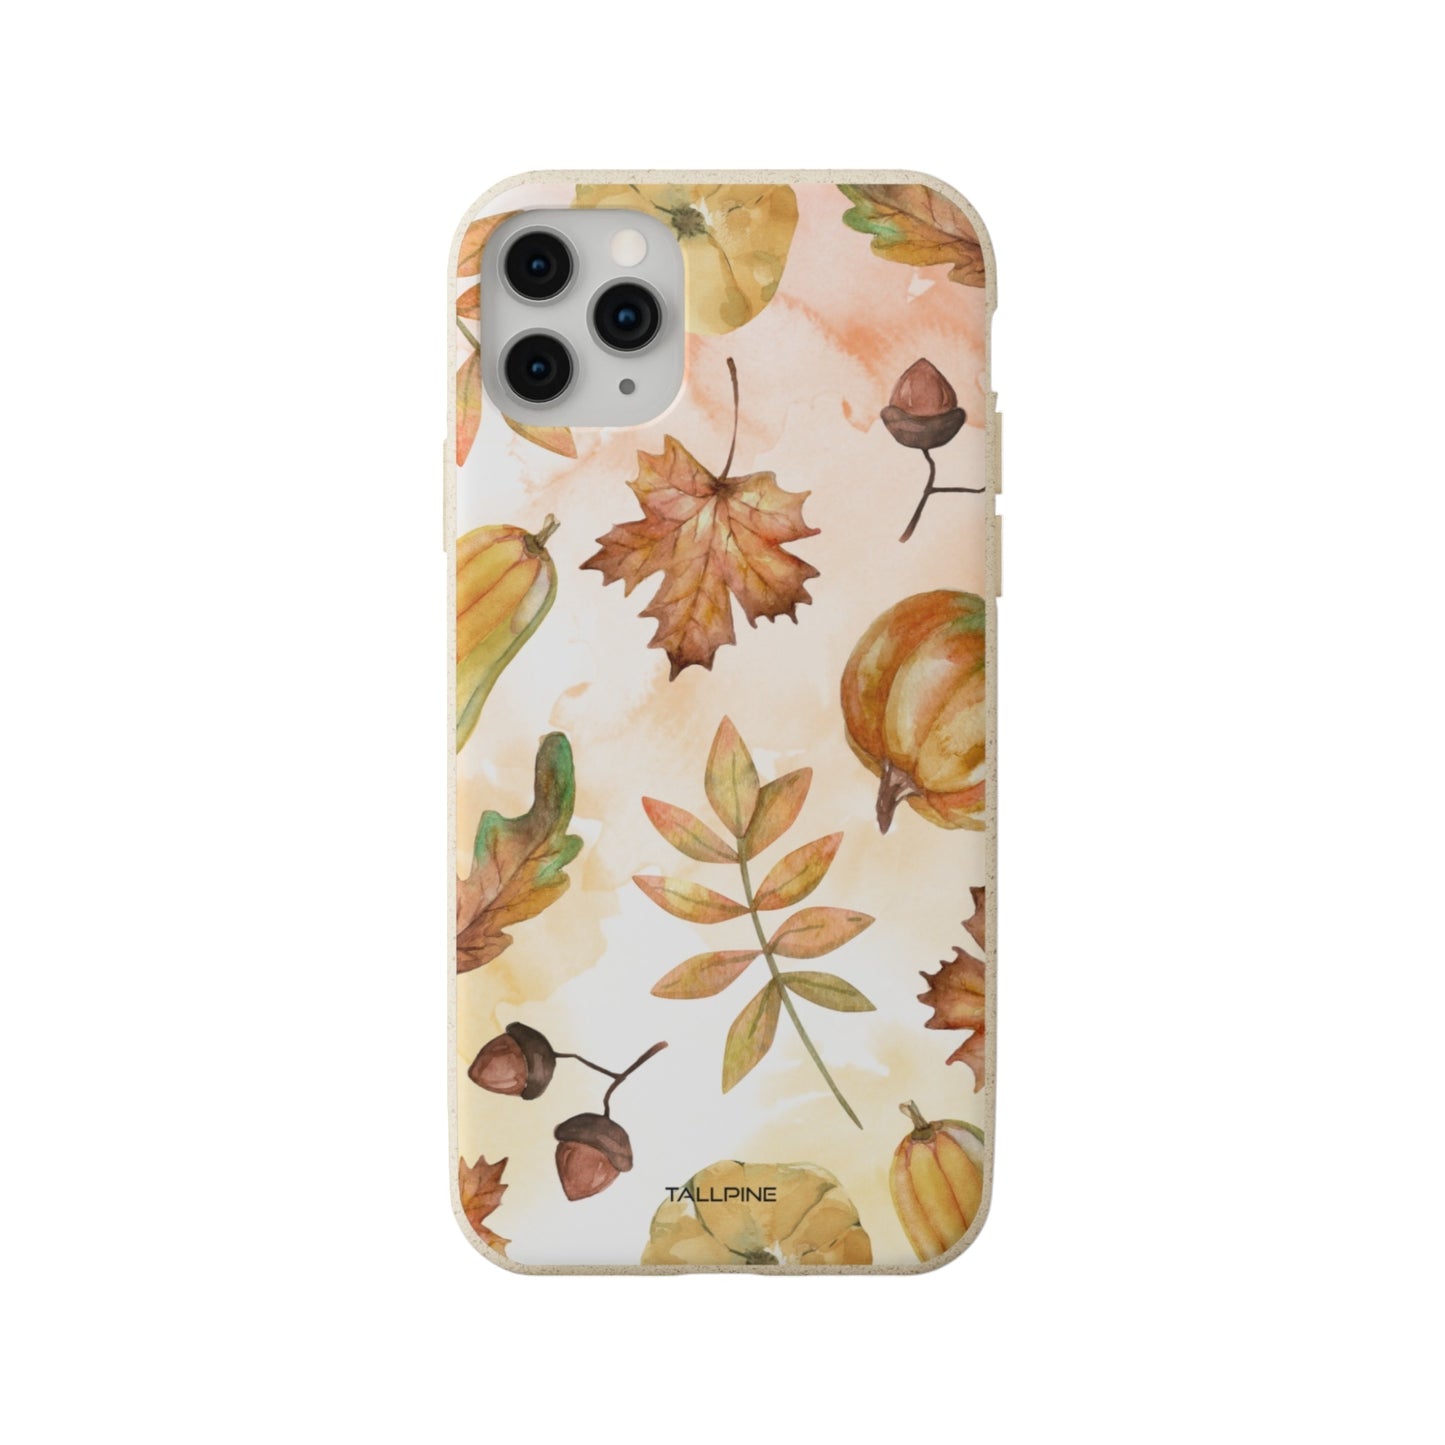 Autumn Harvest - Eco Case iPhone 11 Pro Max - Tallpine Cases | Sustainable and Eco-Friendly Phone Cases - autumn leaves nature New orange